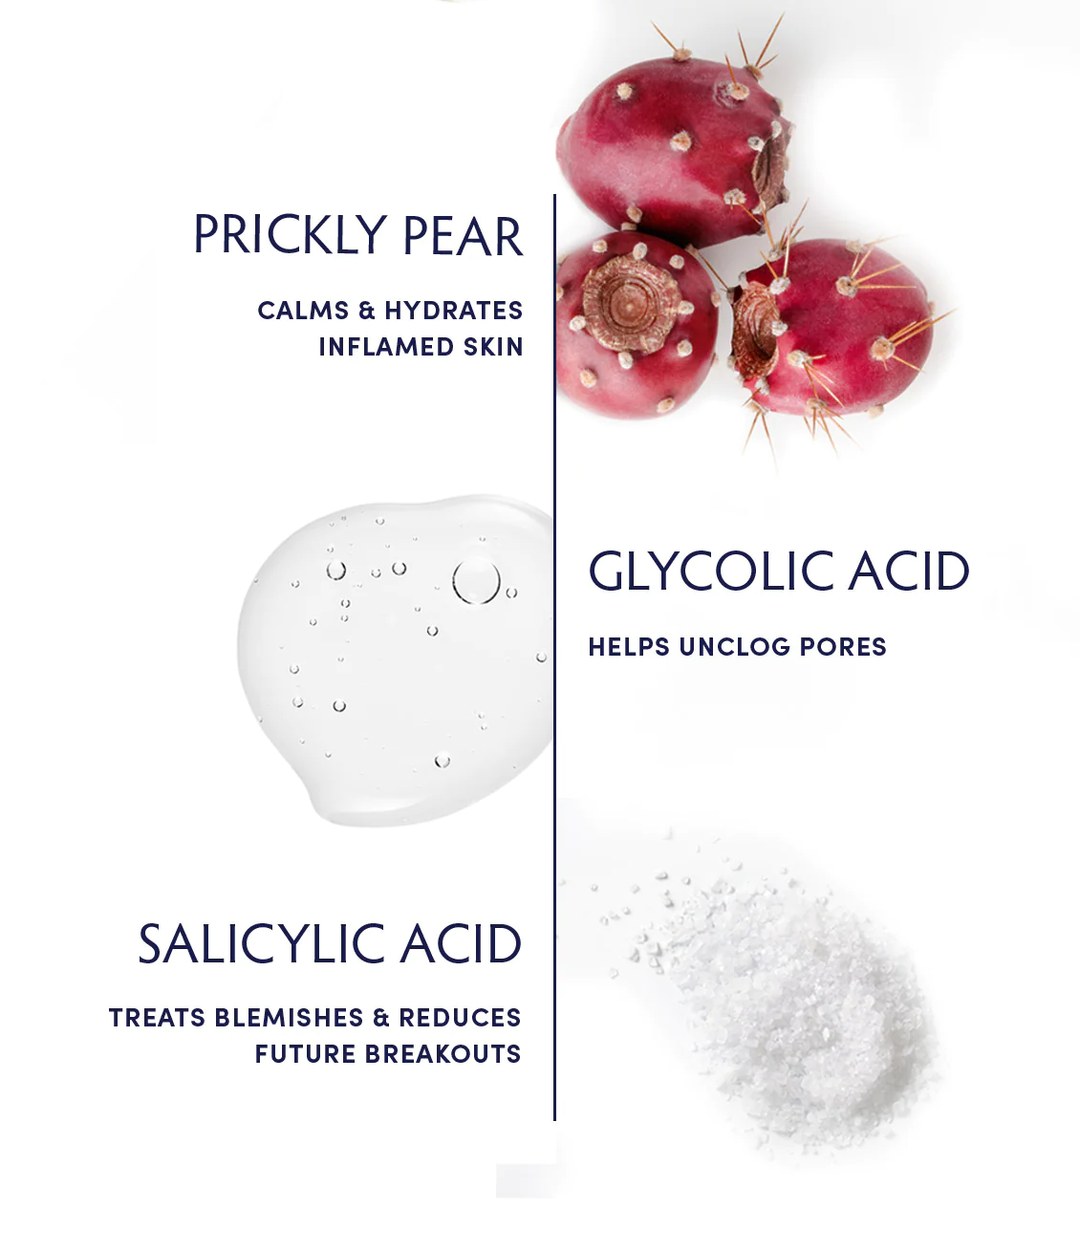 Naturopathica Prickly Pear & Salicylic Acid Acne Clearing Tonic ingredients